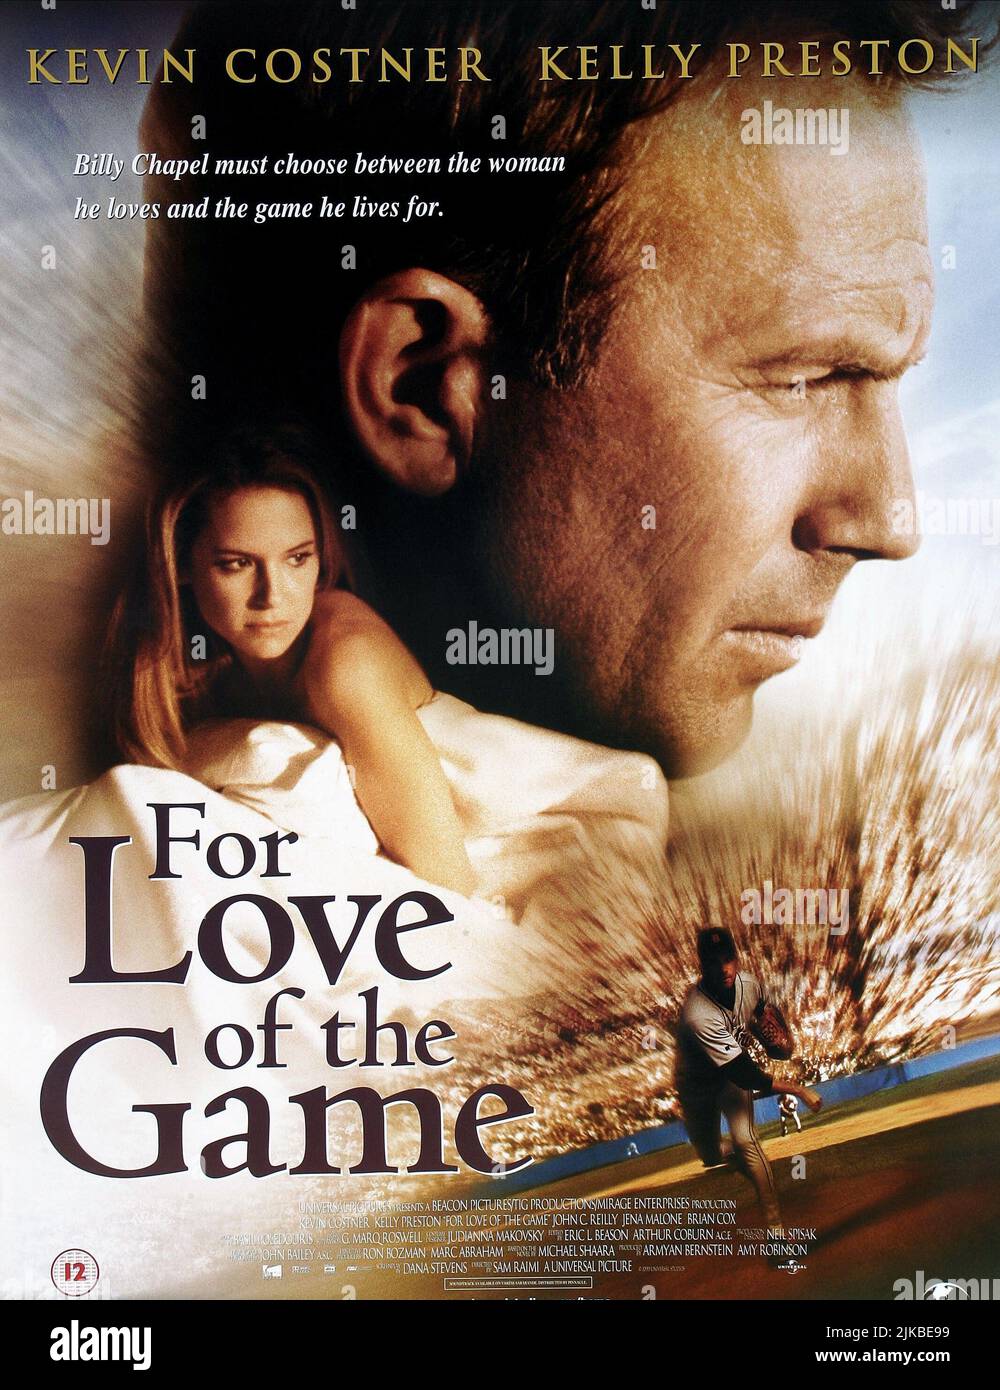 Kevin Costner Got Juiced Filming 'For the Love of the Game